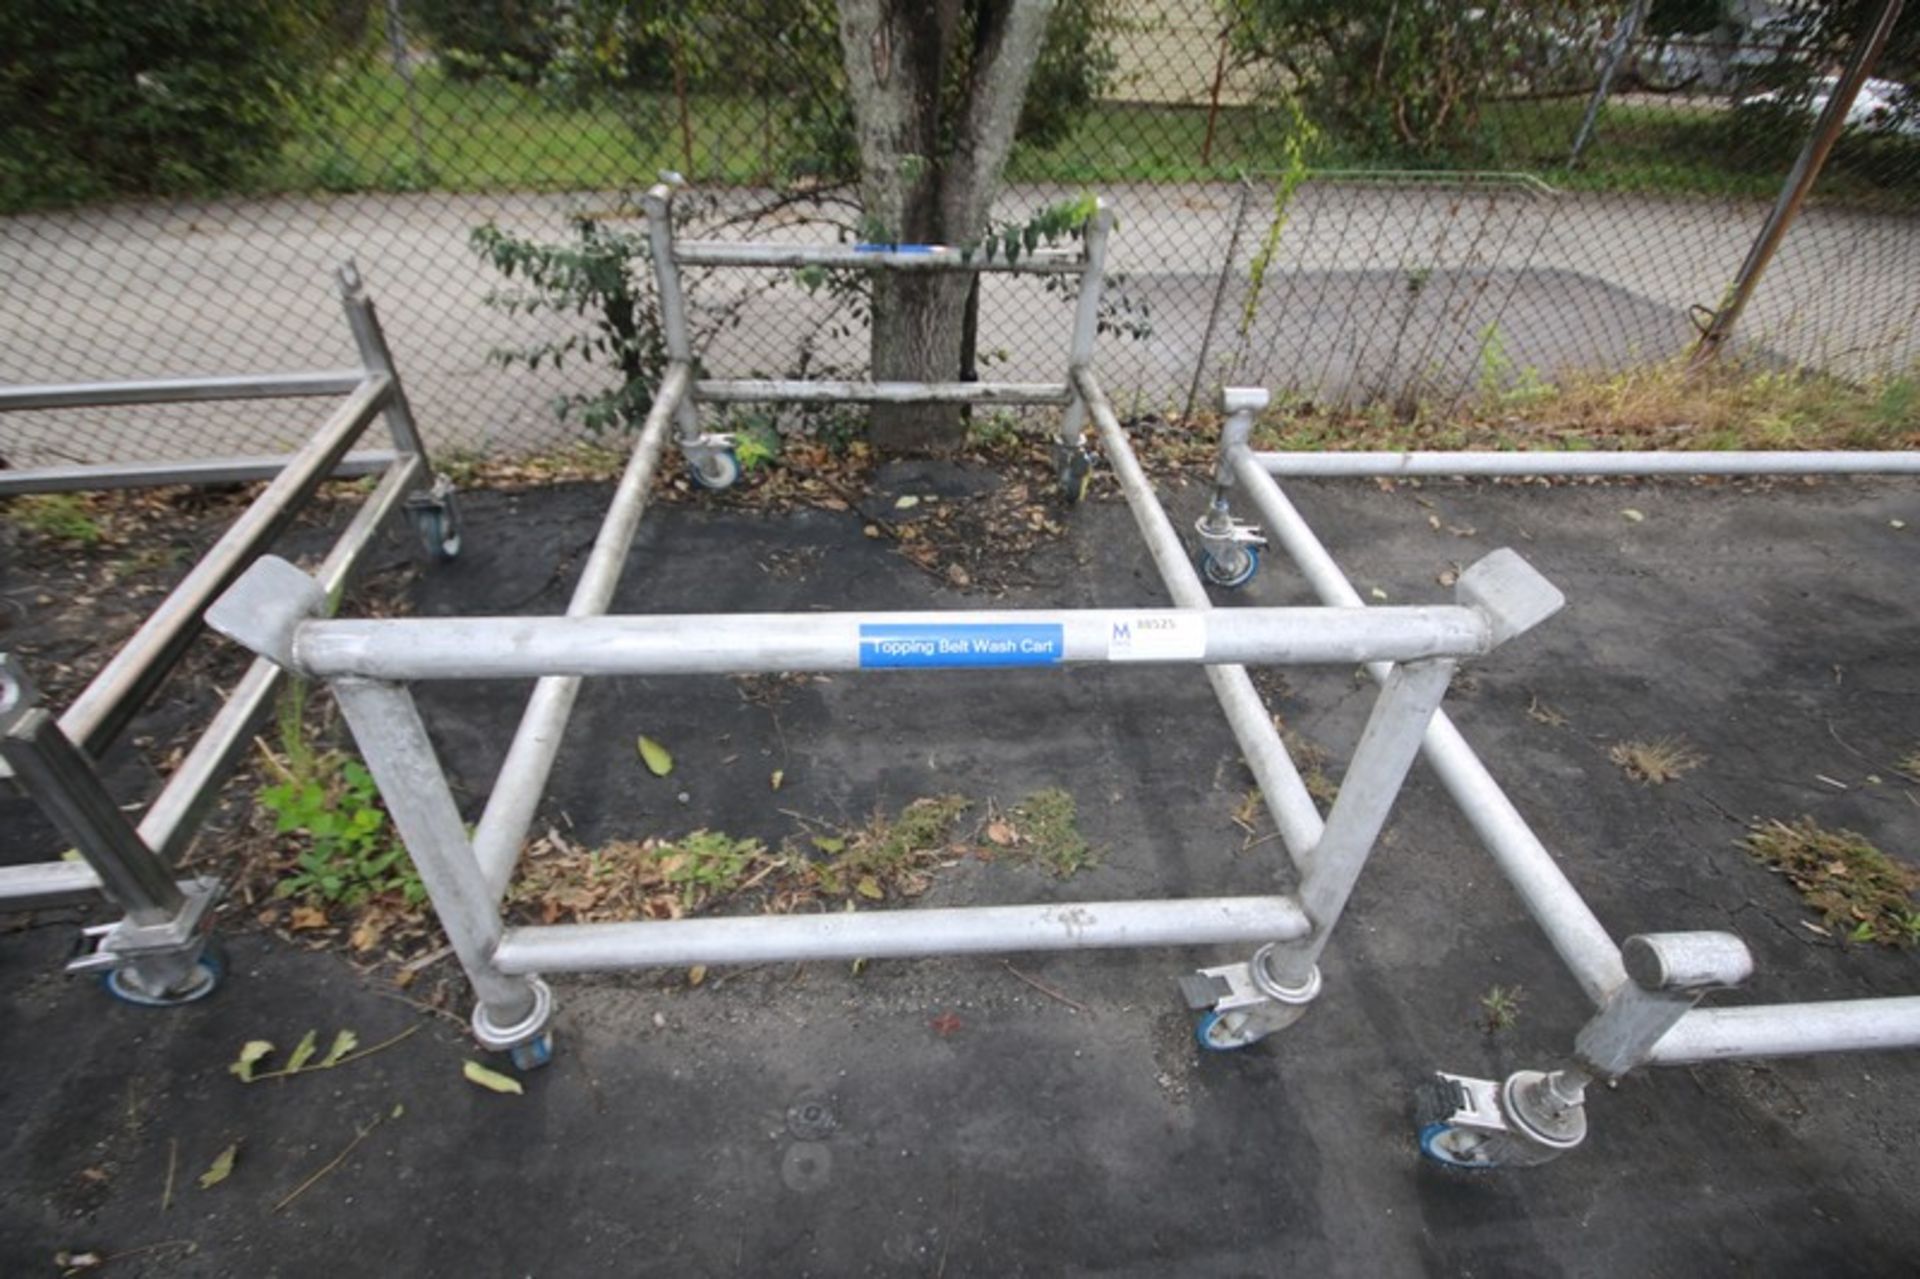 75" L x 48" W x 33" H Topping Belt Wash Cart (INV#88525)(Located @ the MDG Auction Showroom in Pgh.,